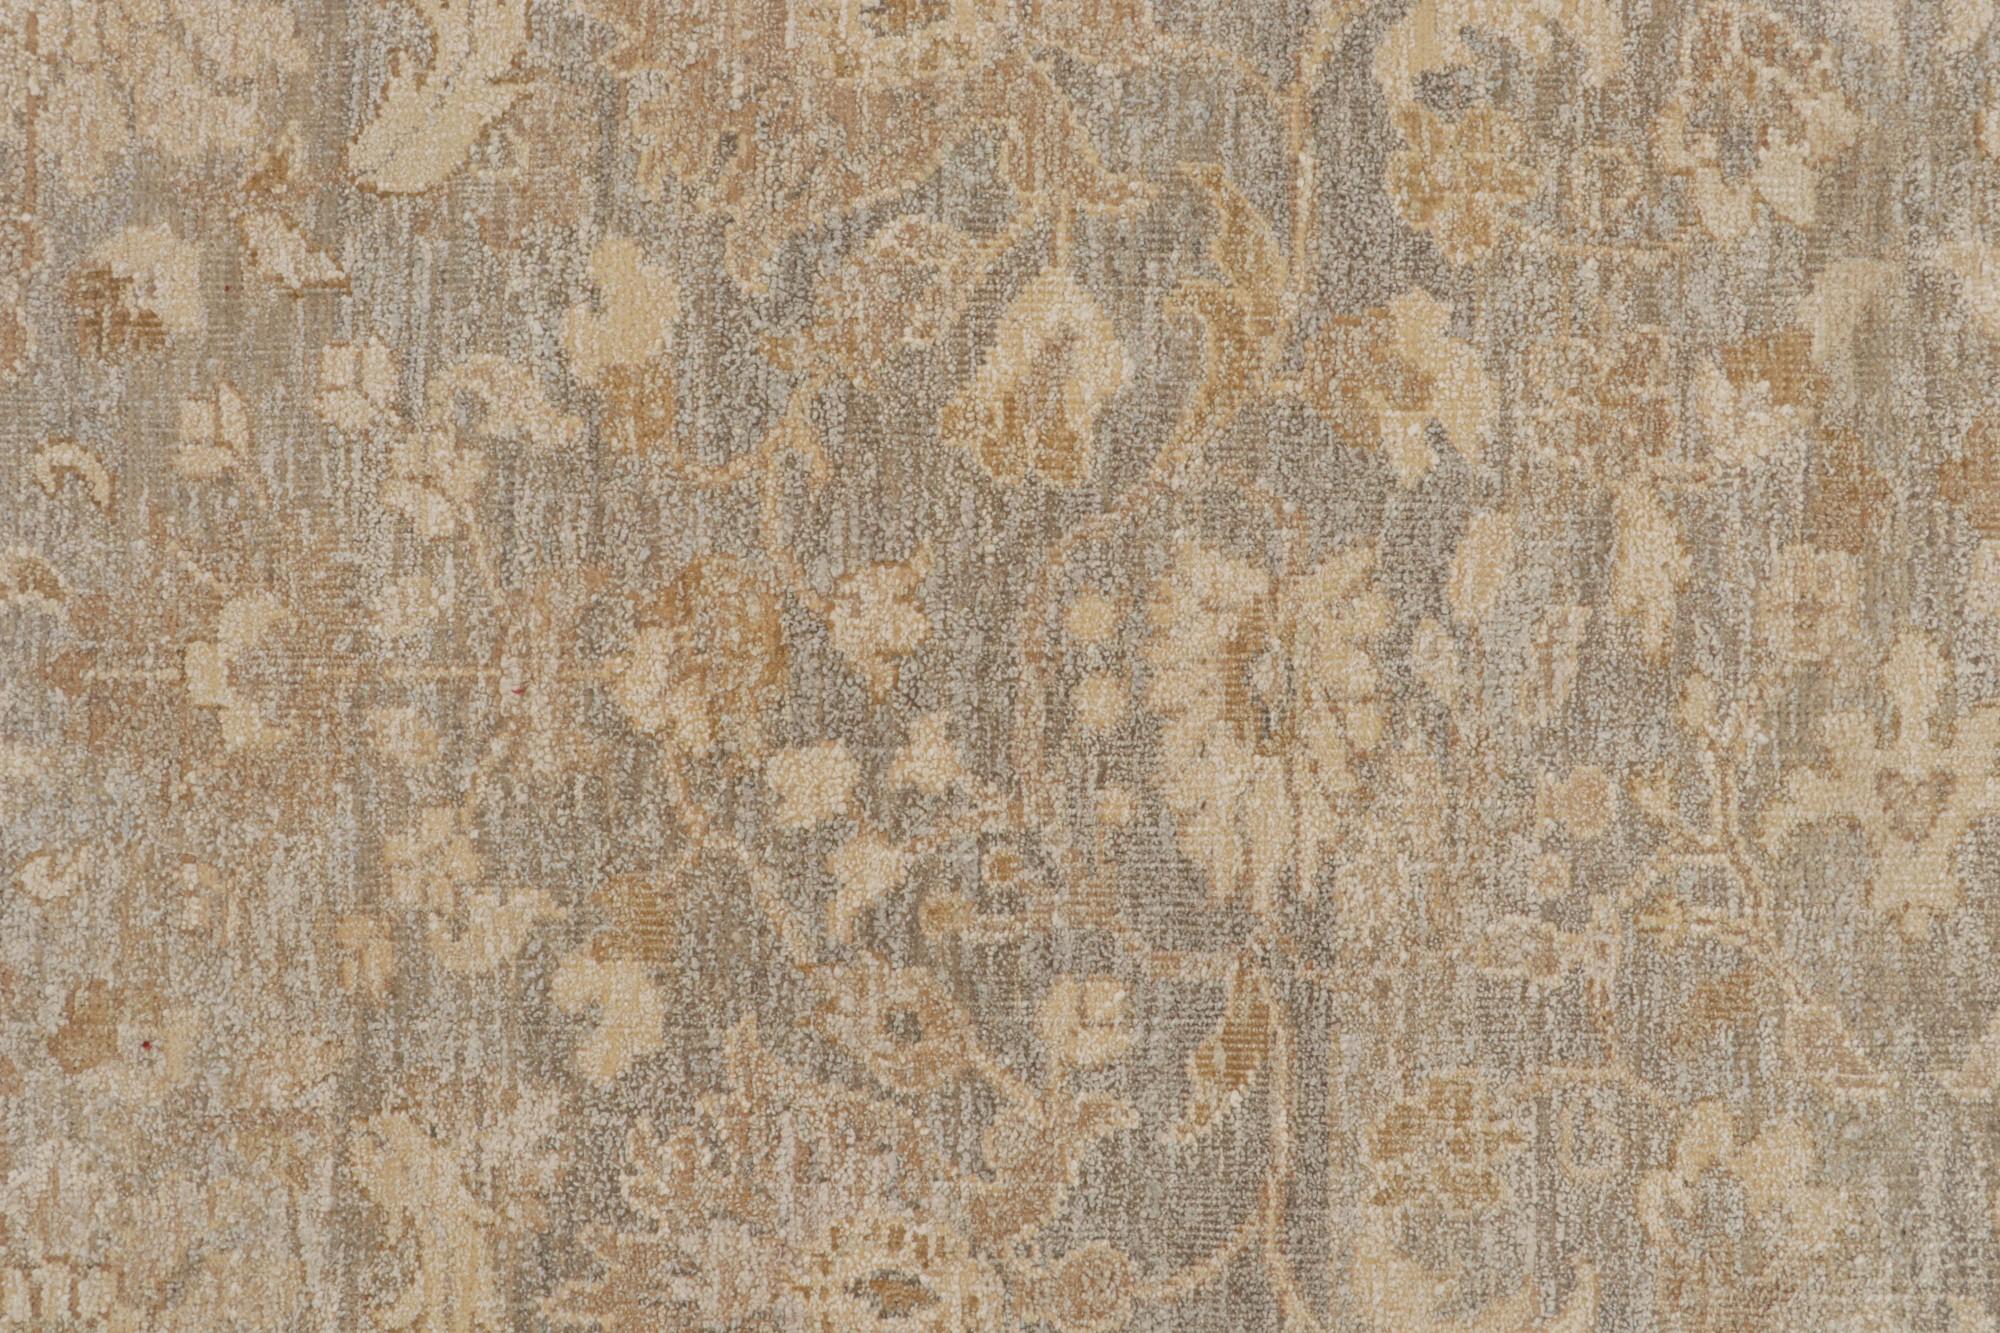 Contemporary Rug & Kilim’s Oushak Style Rug in Grey, Beige & Gold Floral Pattern For Sale